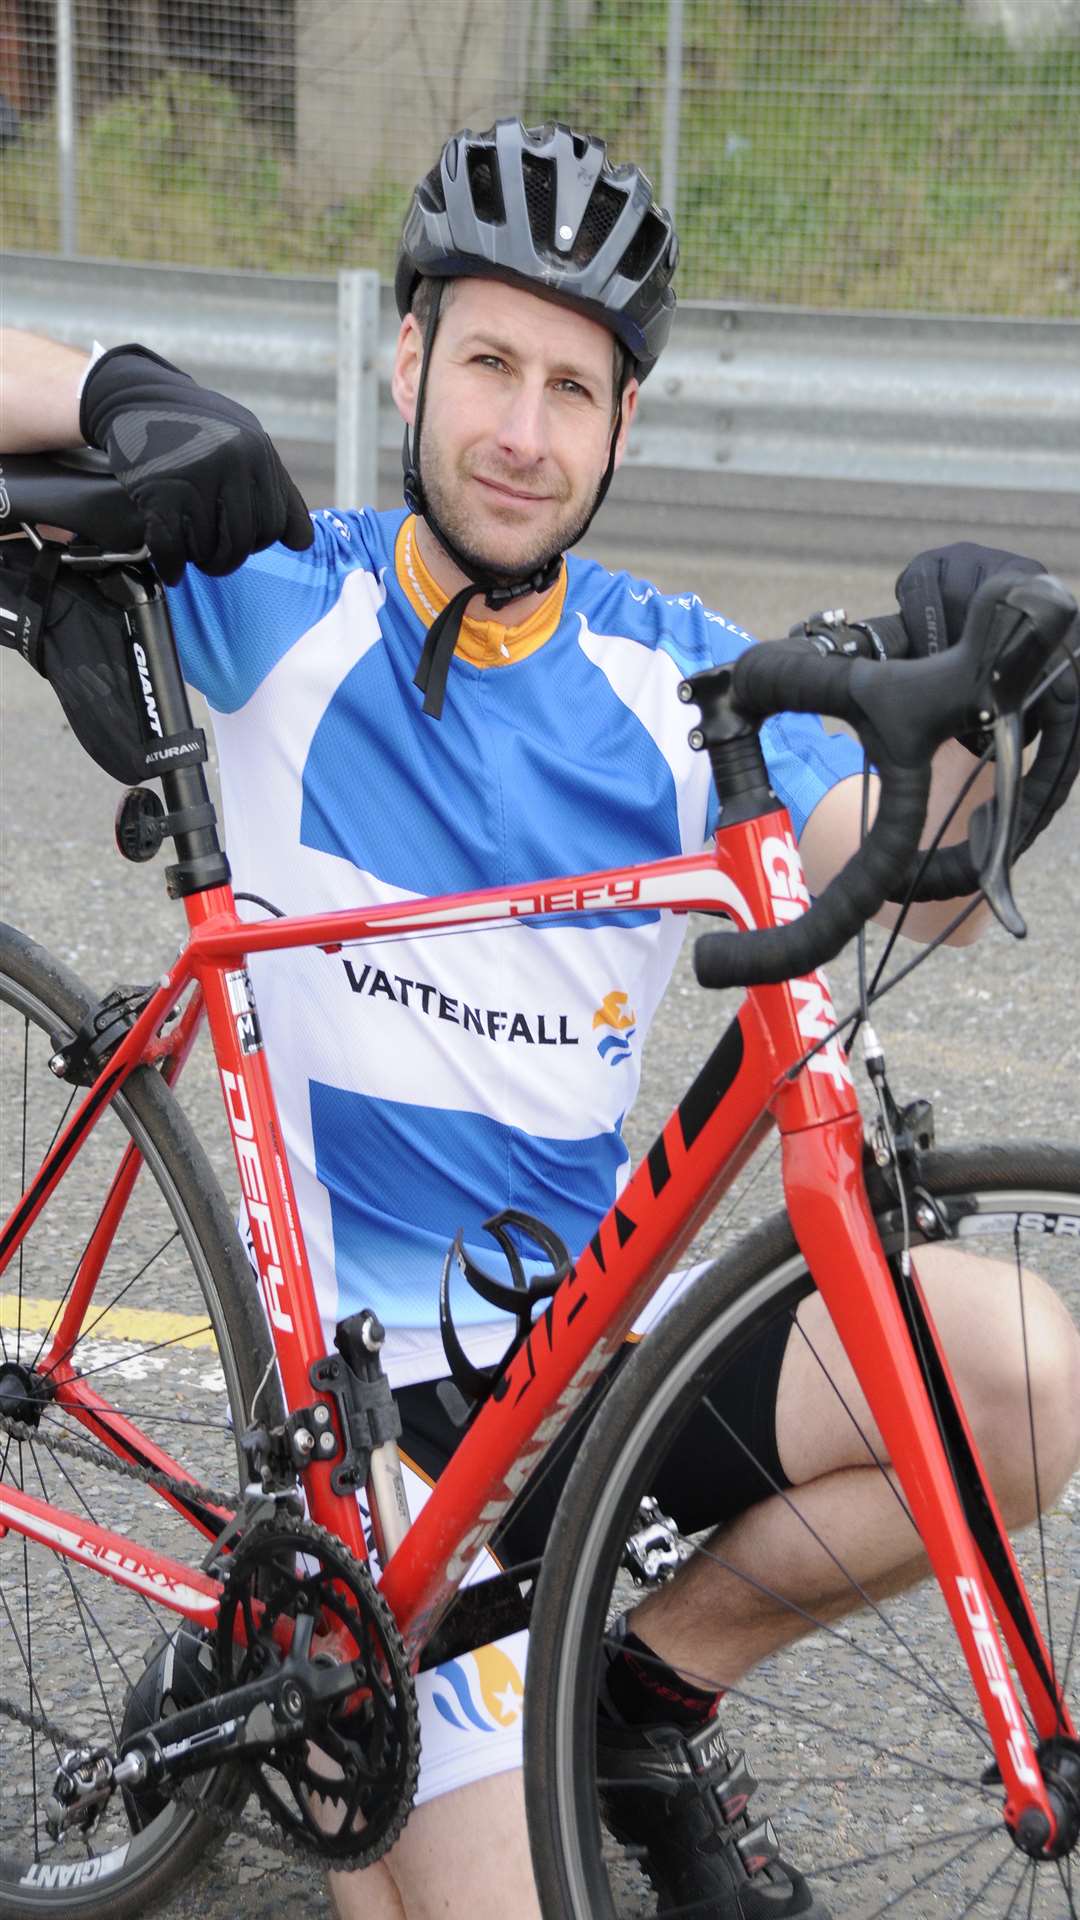 Matthew Green of Vattenfall, key partner of the KM Big Bike Ride, will be taking part in the event on Sunday, April 26.